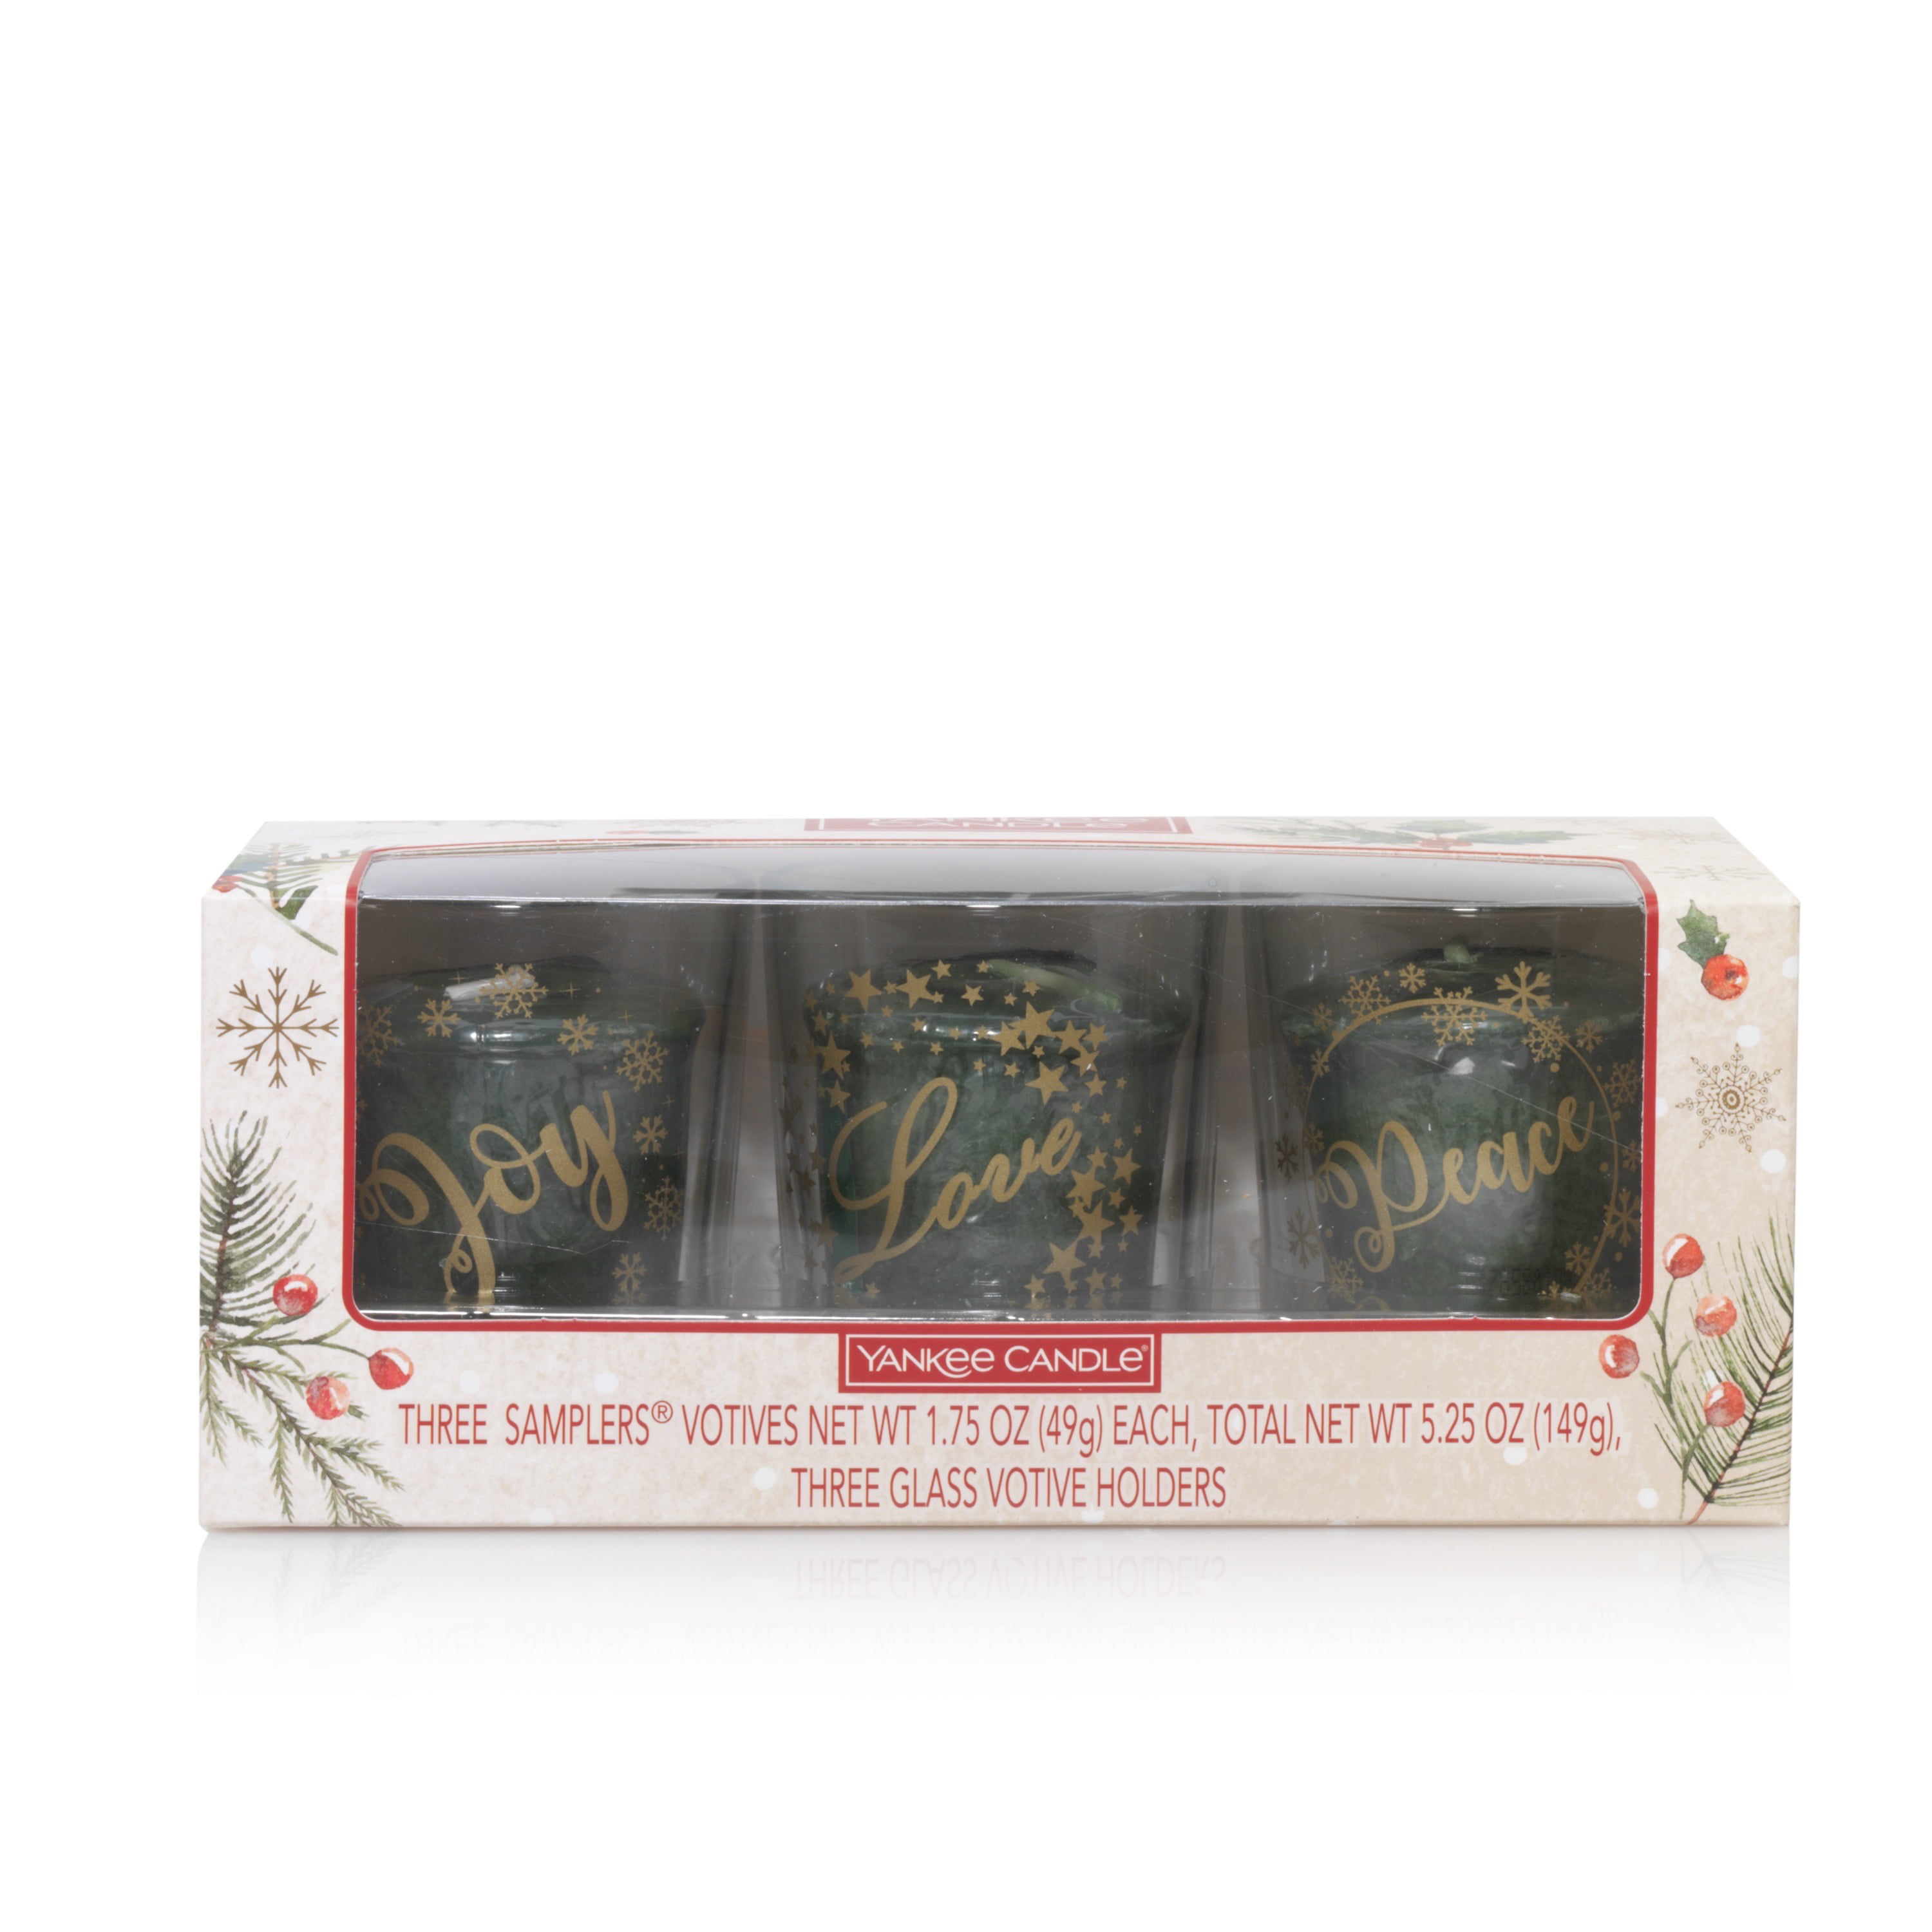 New Yankee Candle FLICKER STARS VOTIVE HOLDER Discontinued D3 SET OF 3 